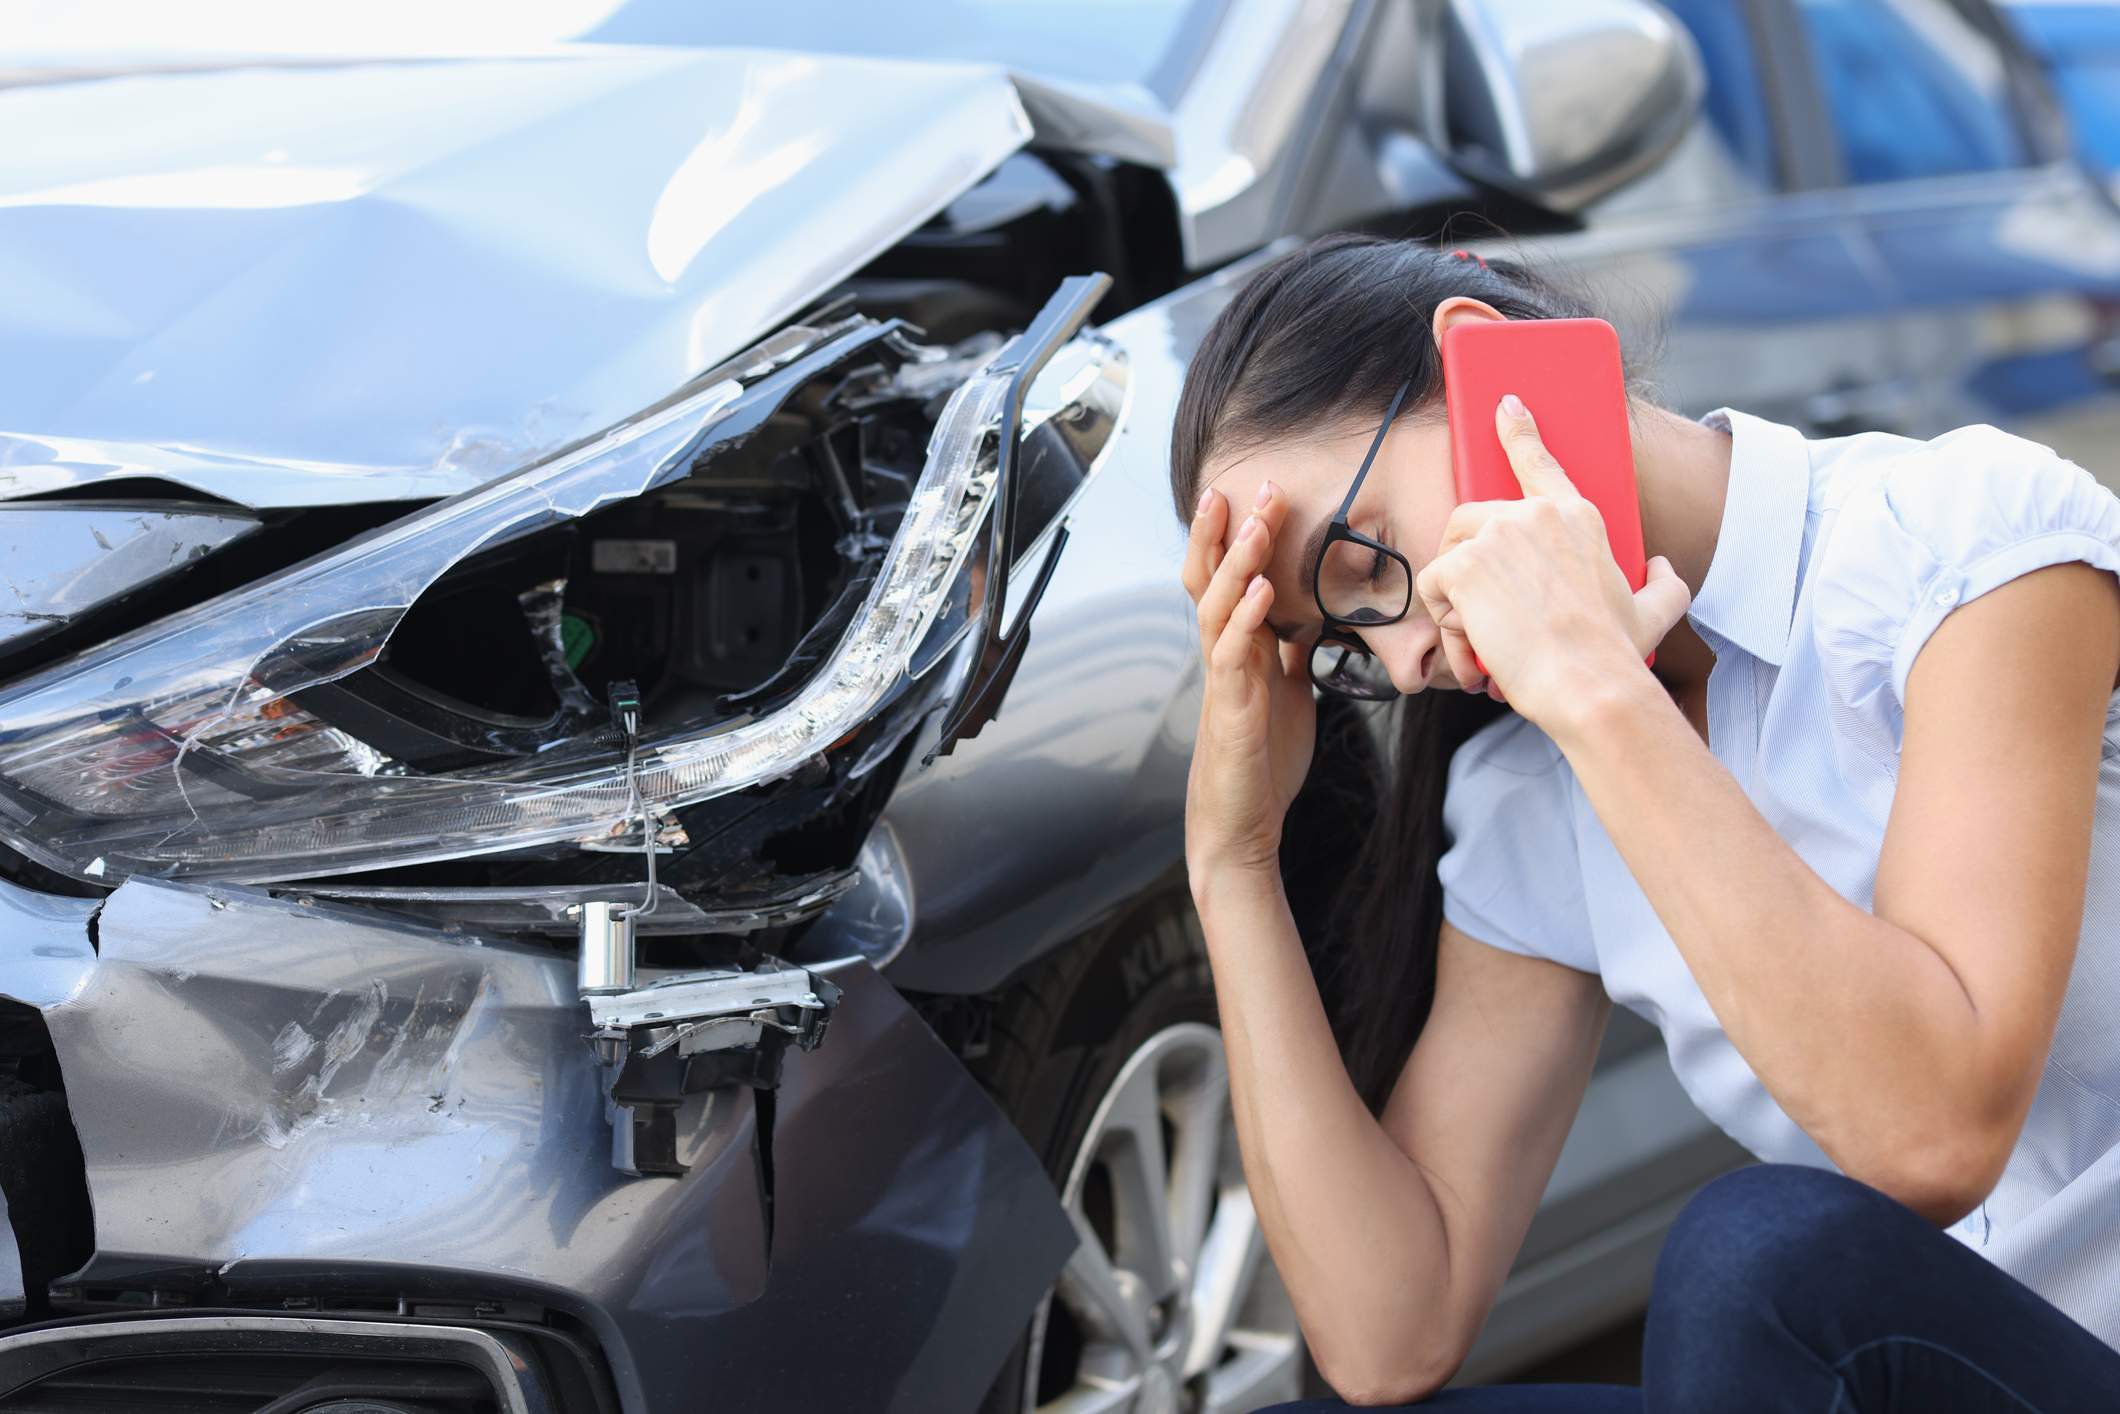 Injured in a Car Accident? Trust Our Expert Car Crash Law Firm to Fight for Your Rights